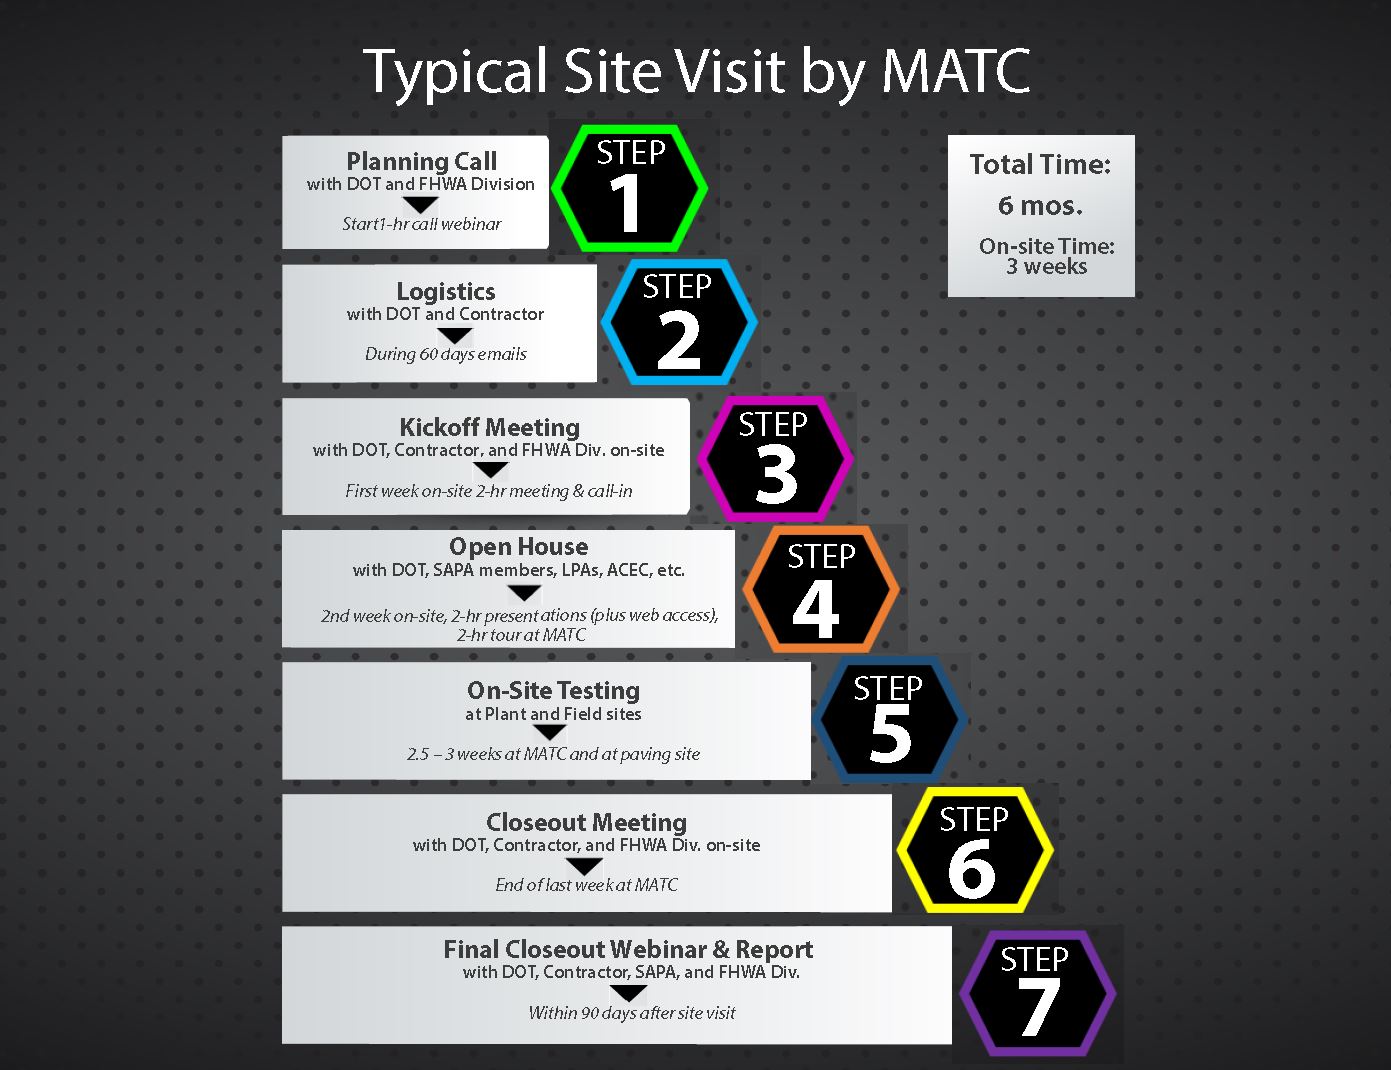 This graphic contains a flowchart which shows the schedule and events involved in a typical site visit by the MATC.